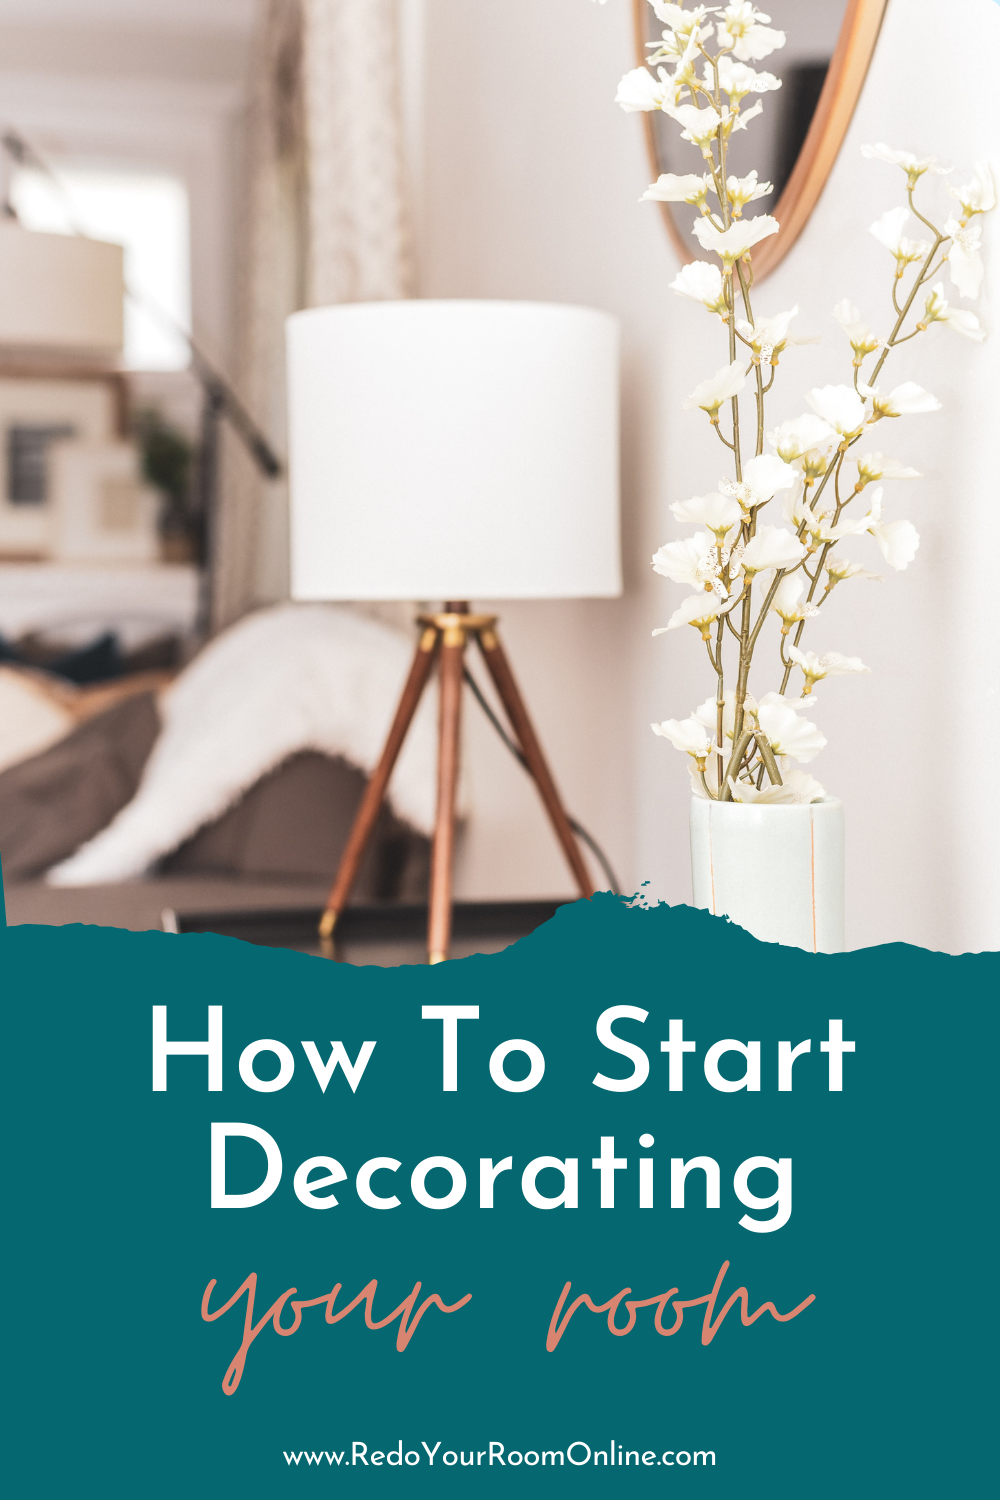 How To Start Decorating a Room: Do This First — Redo Your Room Online